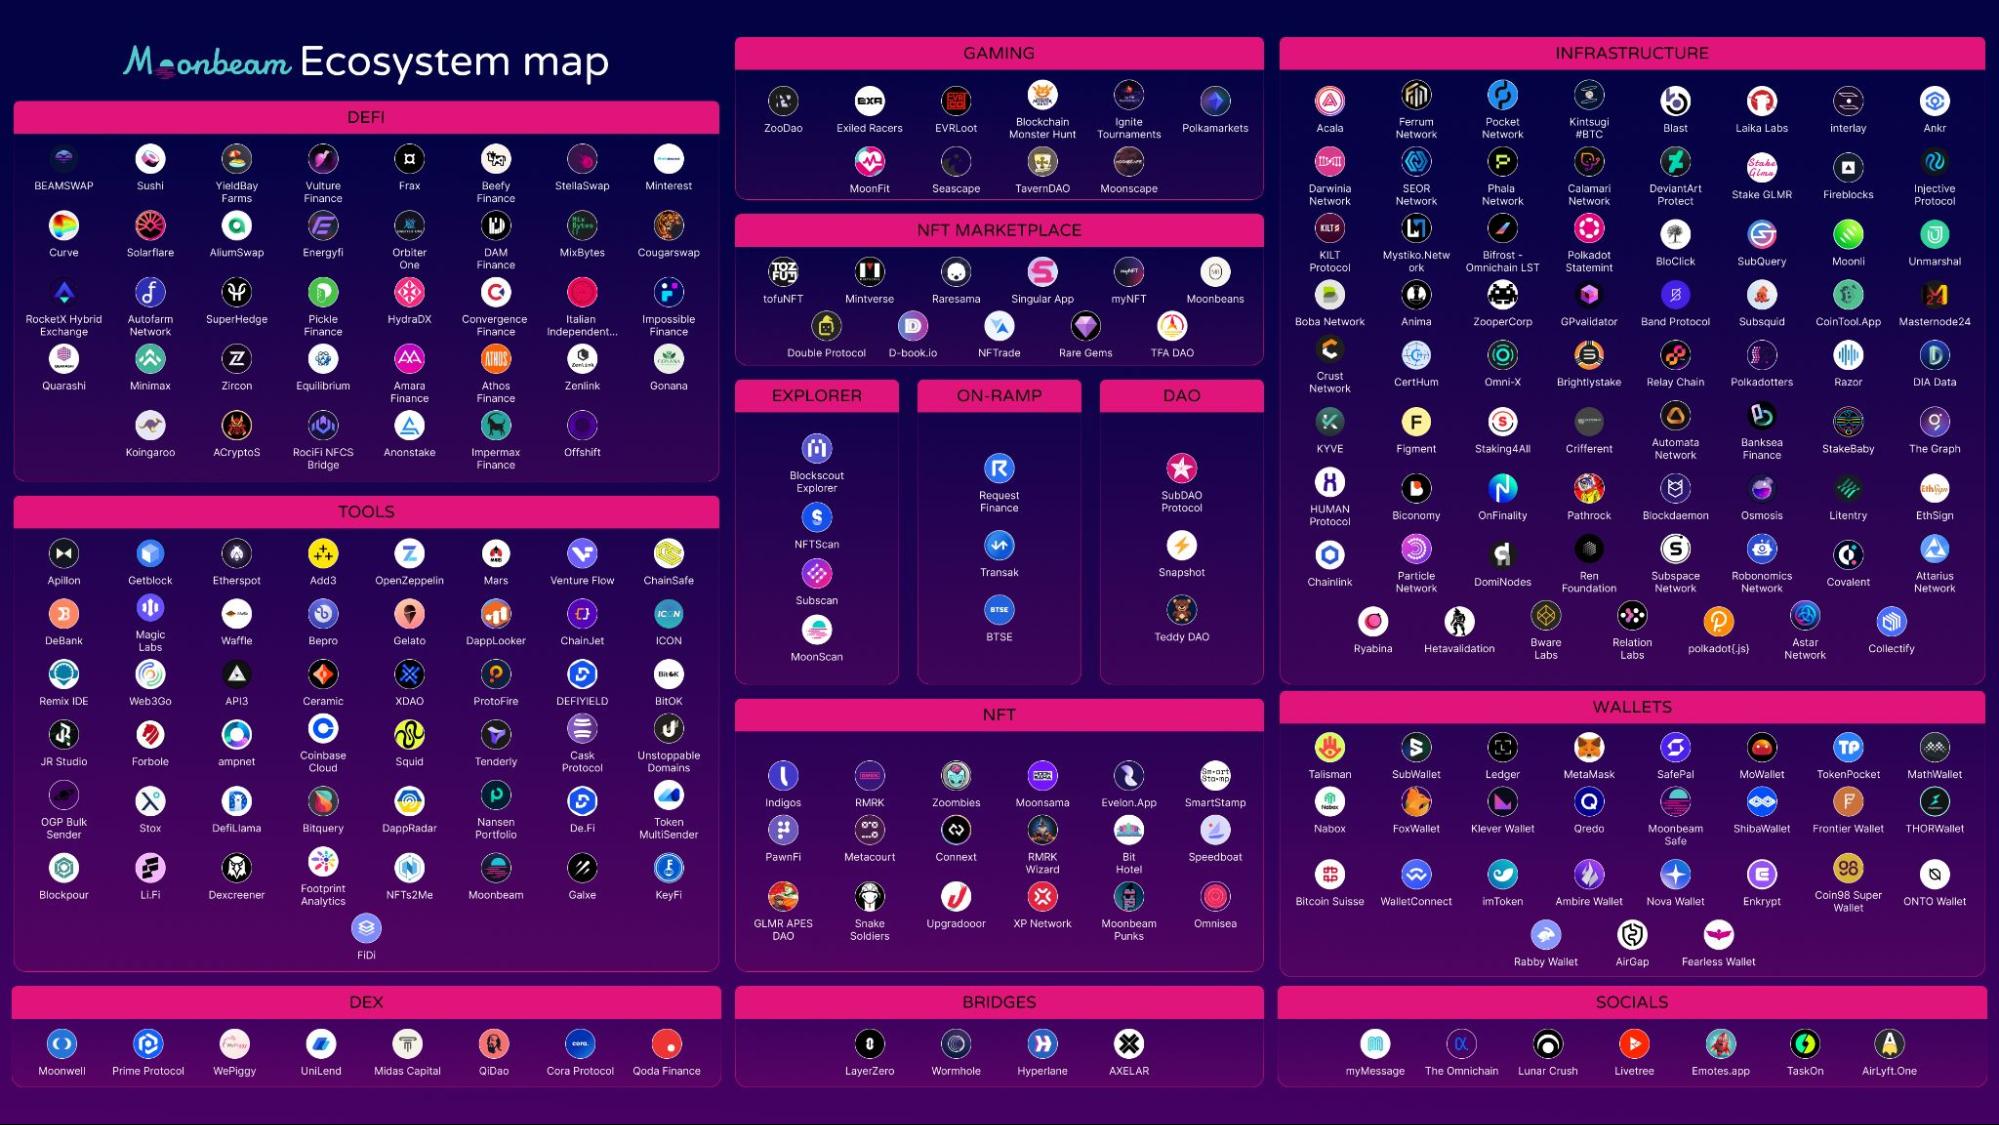 Detailed Moonbeam Ecosystem map categorizing projects into DEFI, gaming, infrastructure, and other sectors